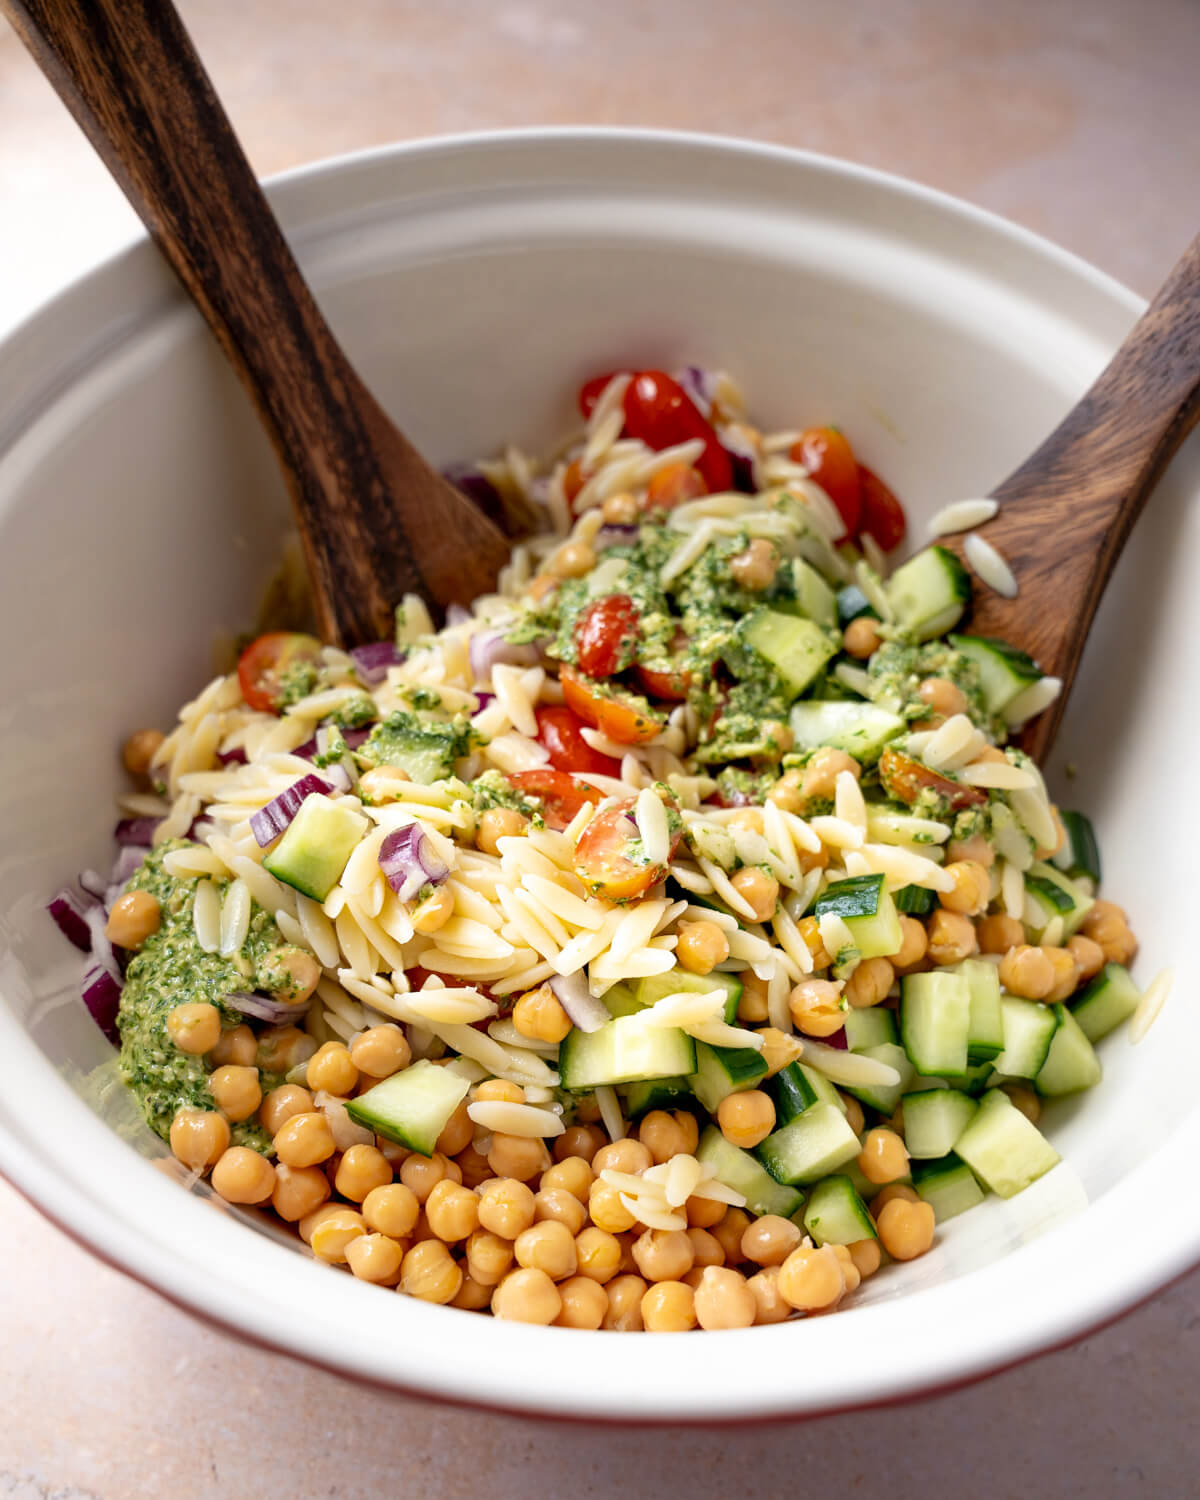 Cooked orzo, chickpeas, cucumber, tomatoes, red onion, and pesto are tossed together with wooden spoons in a white salad bowl to make a pesto orzo salad. 